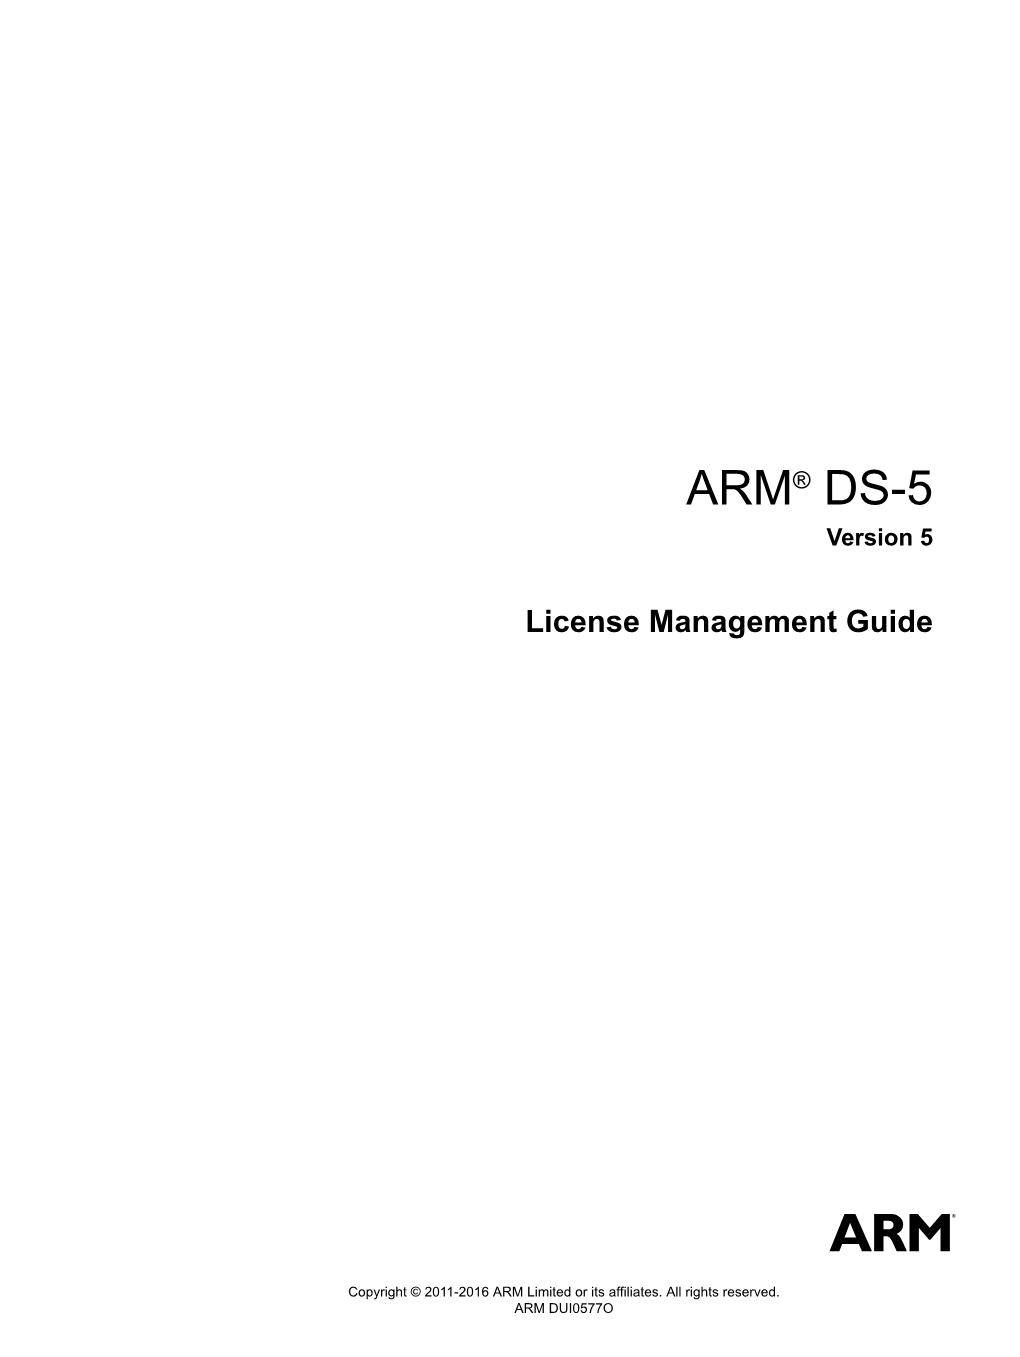 ARM® DS-5 License Management Guide Copyright © 2011-2016 ARM Limited Or Its Affiliates